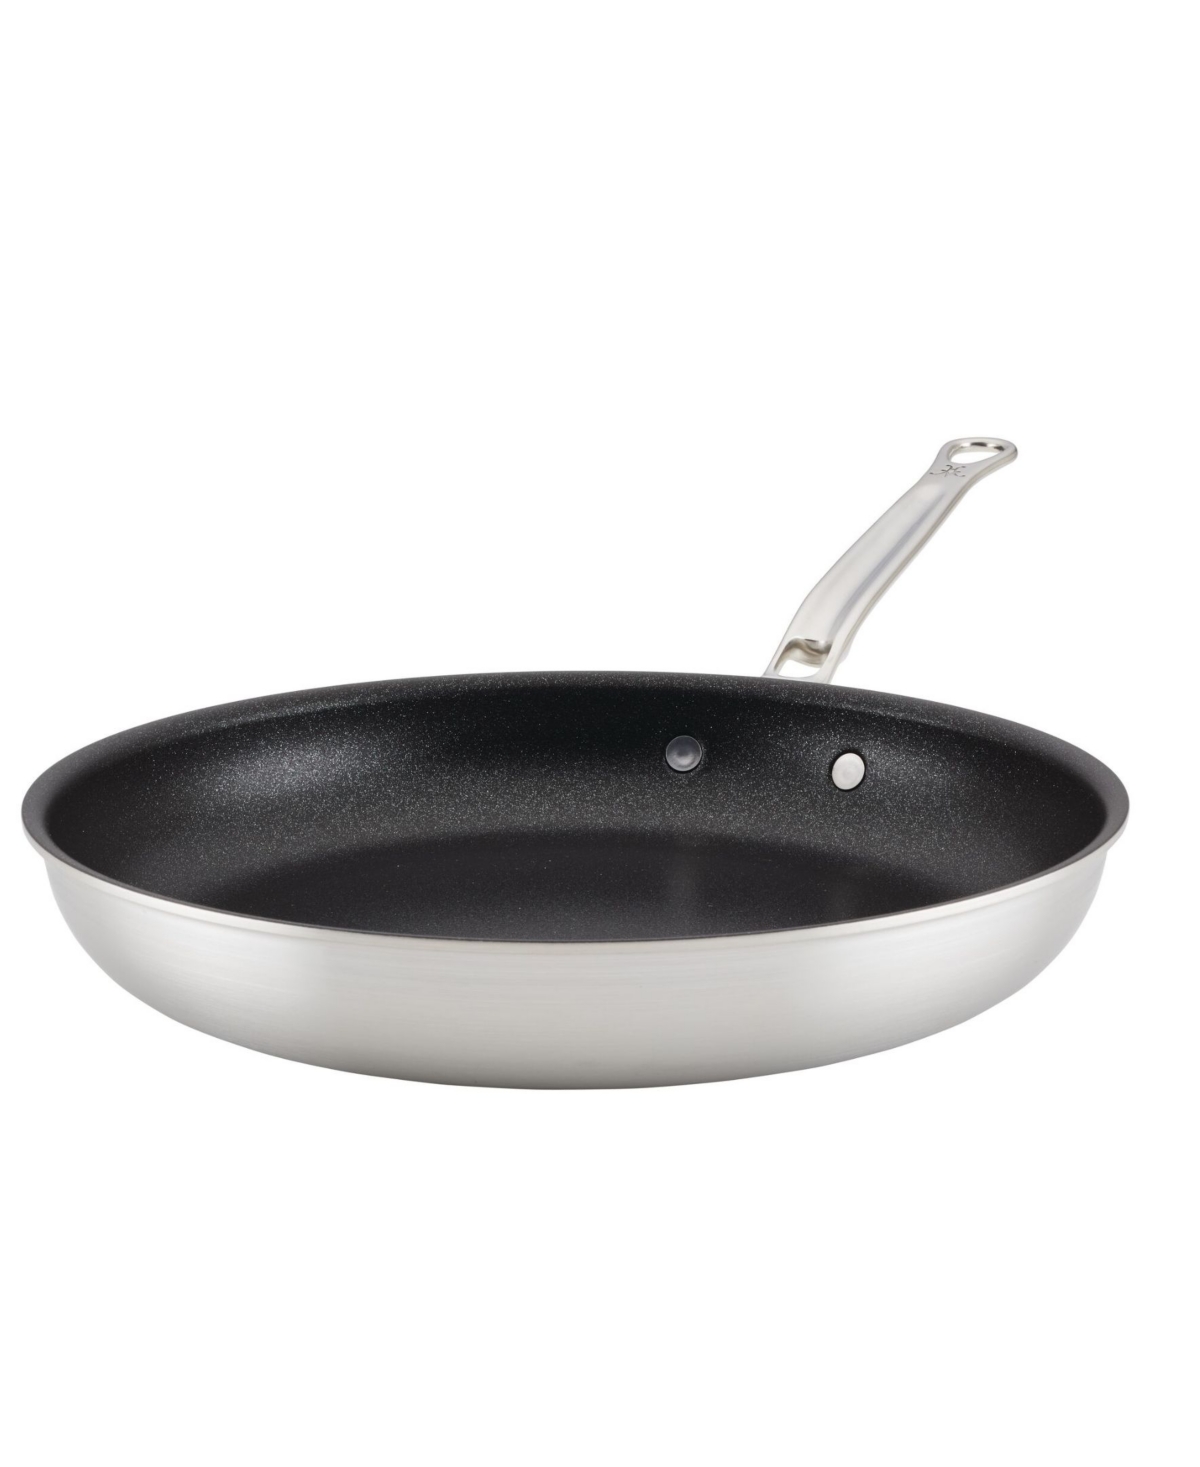 Shop Hestan Thomas Keller Insignia Commercial Clad Stainless Steel With Titum Nonstick 12.5" Open Saute Pan In No Color